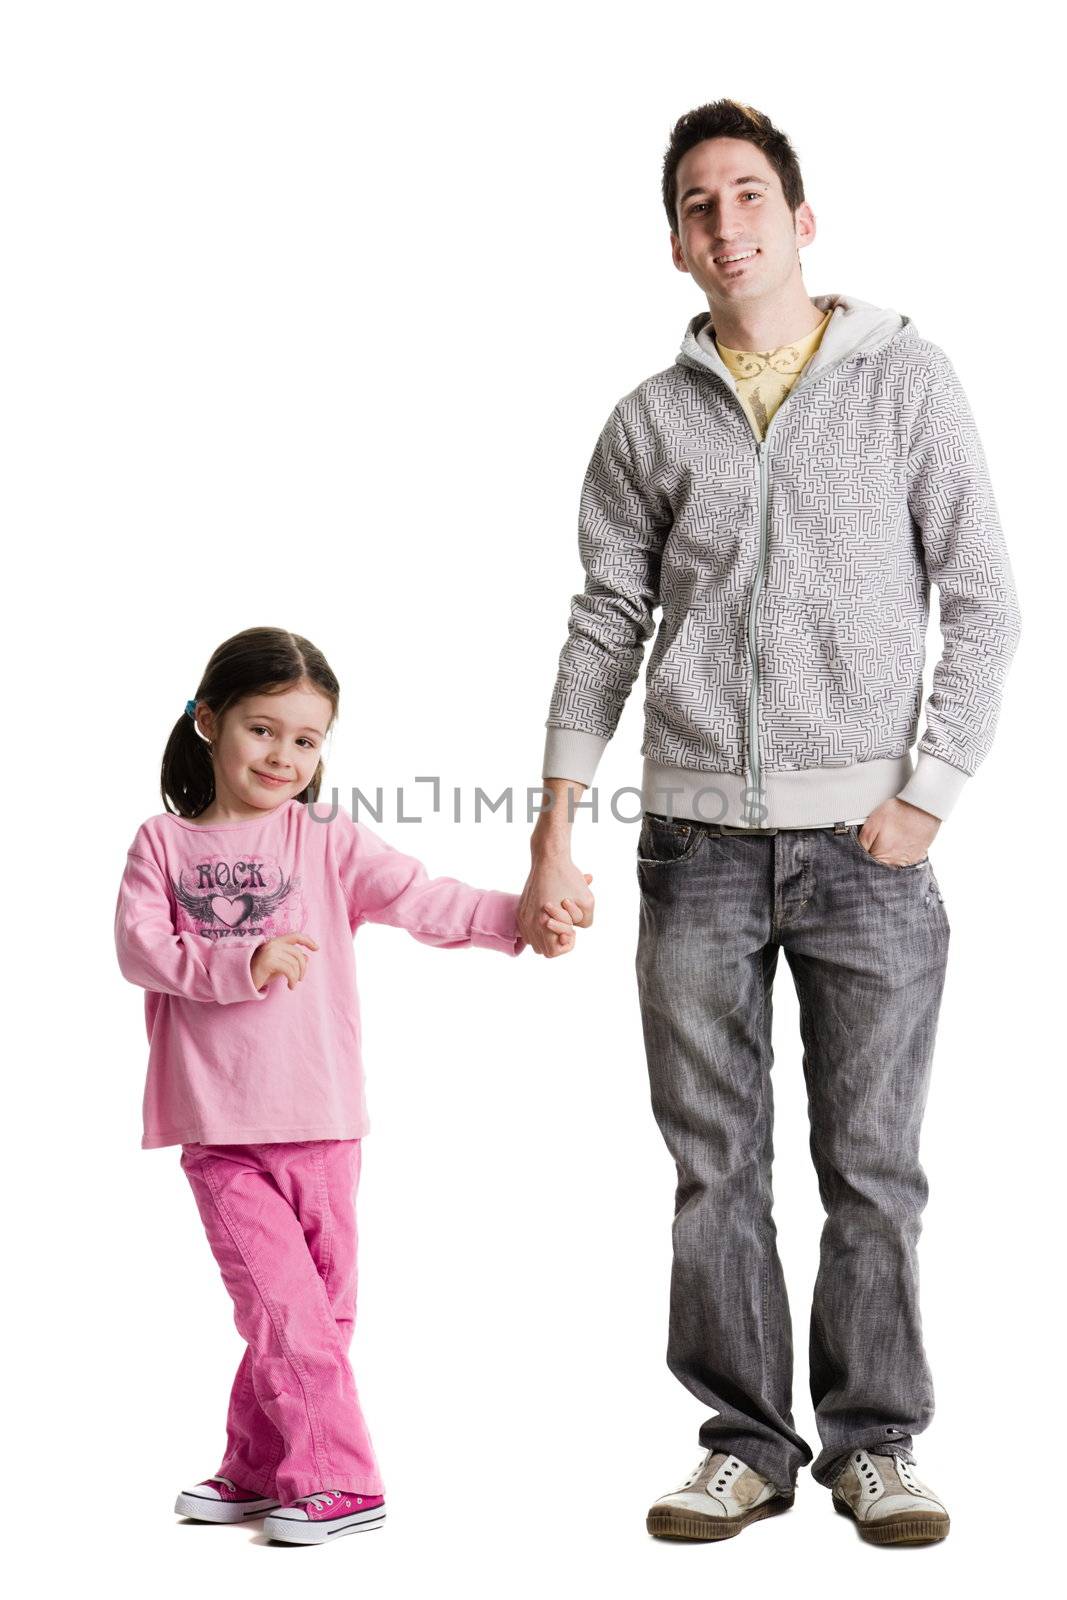 An adult holding a young girls hand on a white background